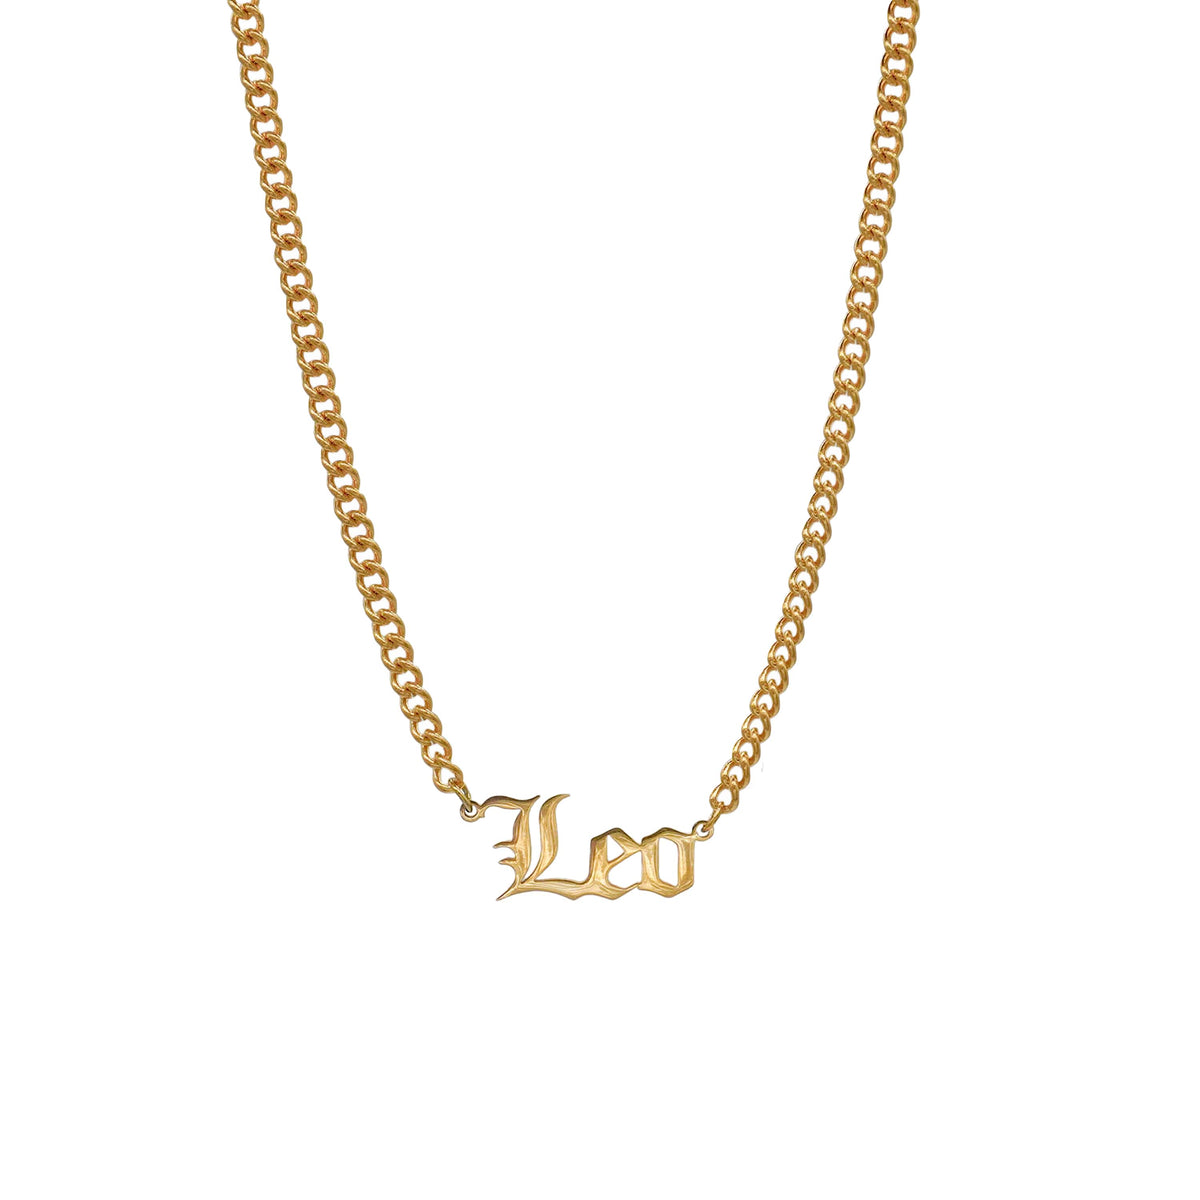 Starborn Patterns 18k Gold Plated Stainless Steel Zodiac Sign Astrology Cuban Chain Link Necklace Choker with Leo Old English Font Charm